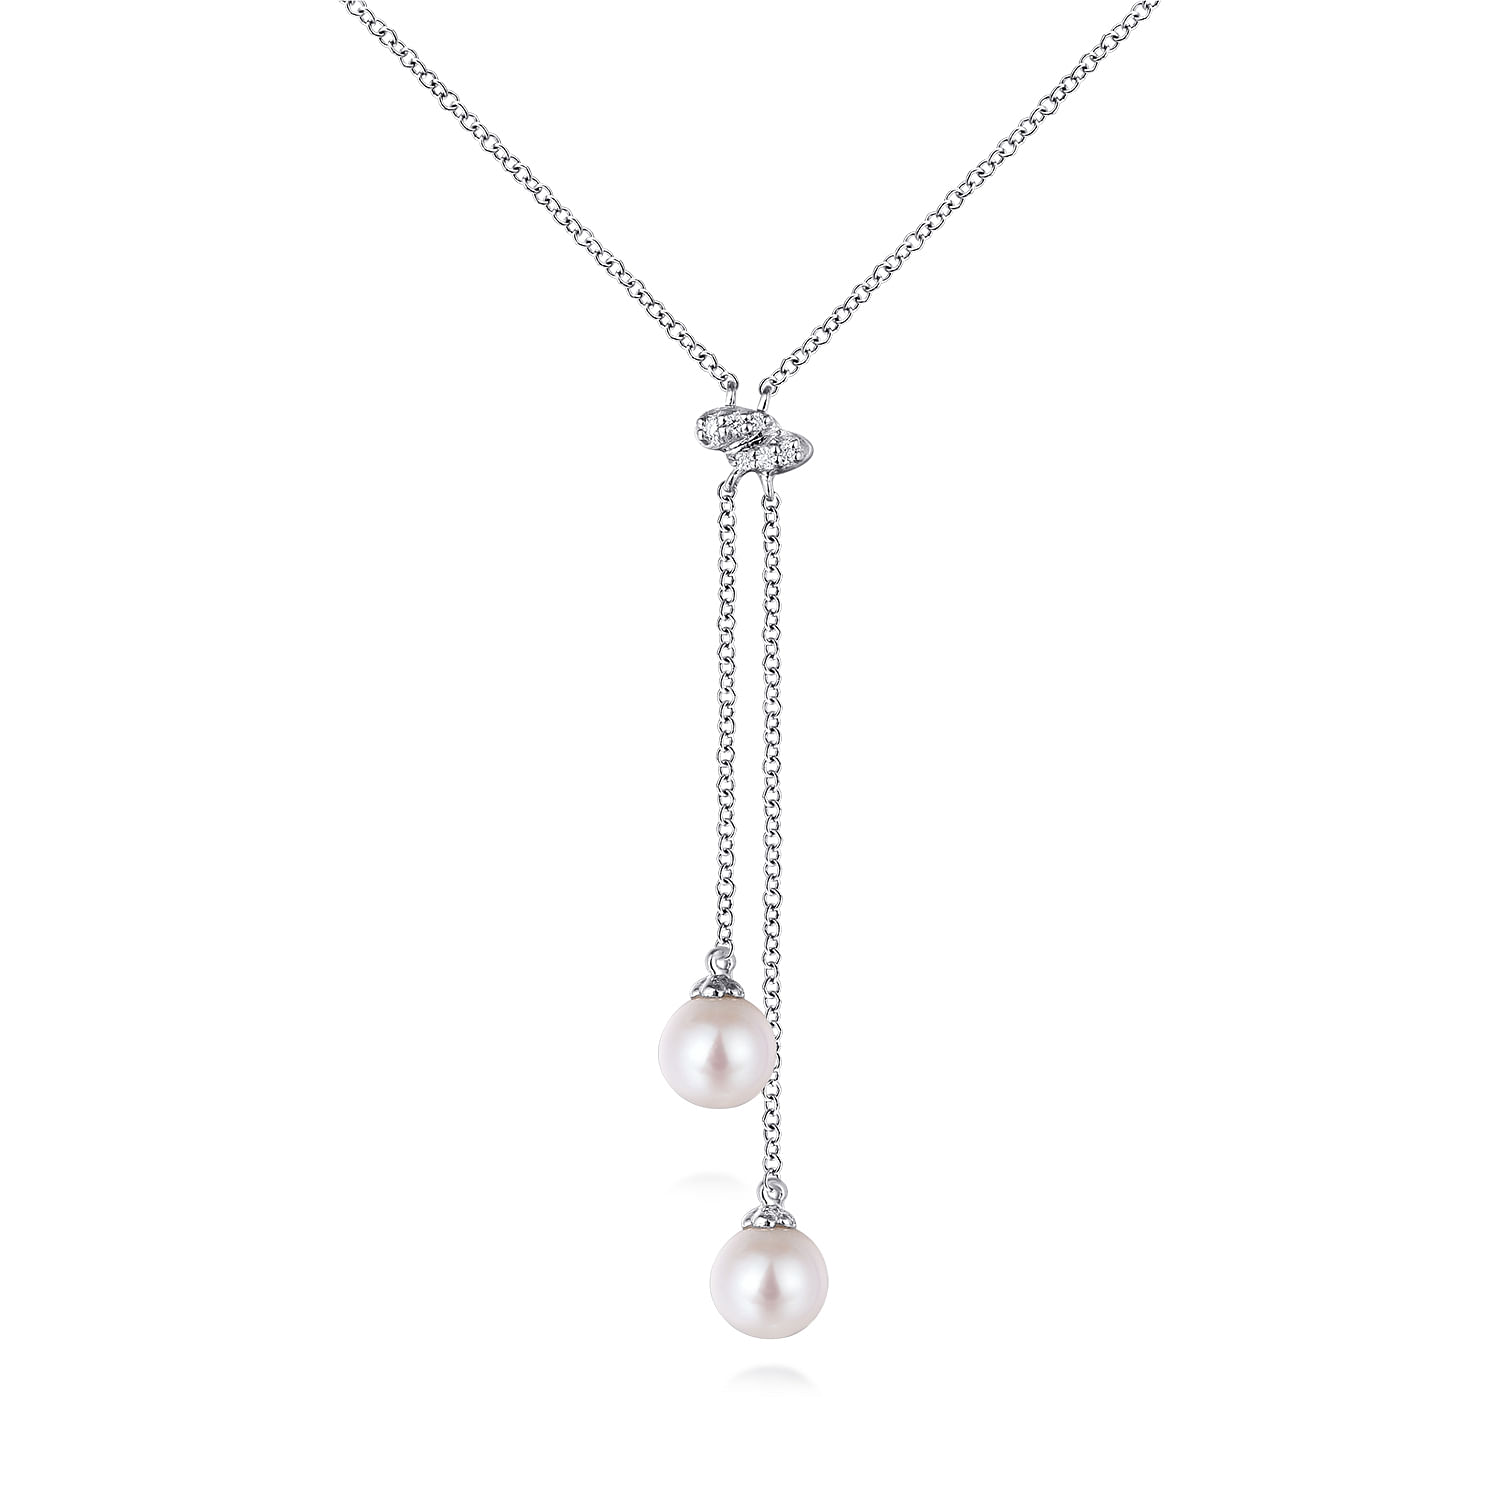 14K White Gold Diamond and Cultured Pearl Lariat Necklace